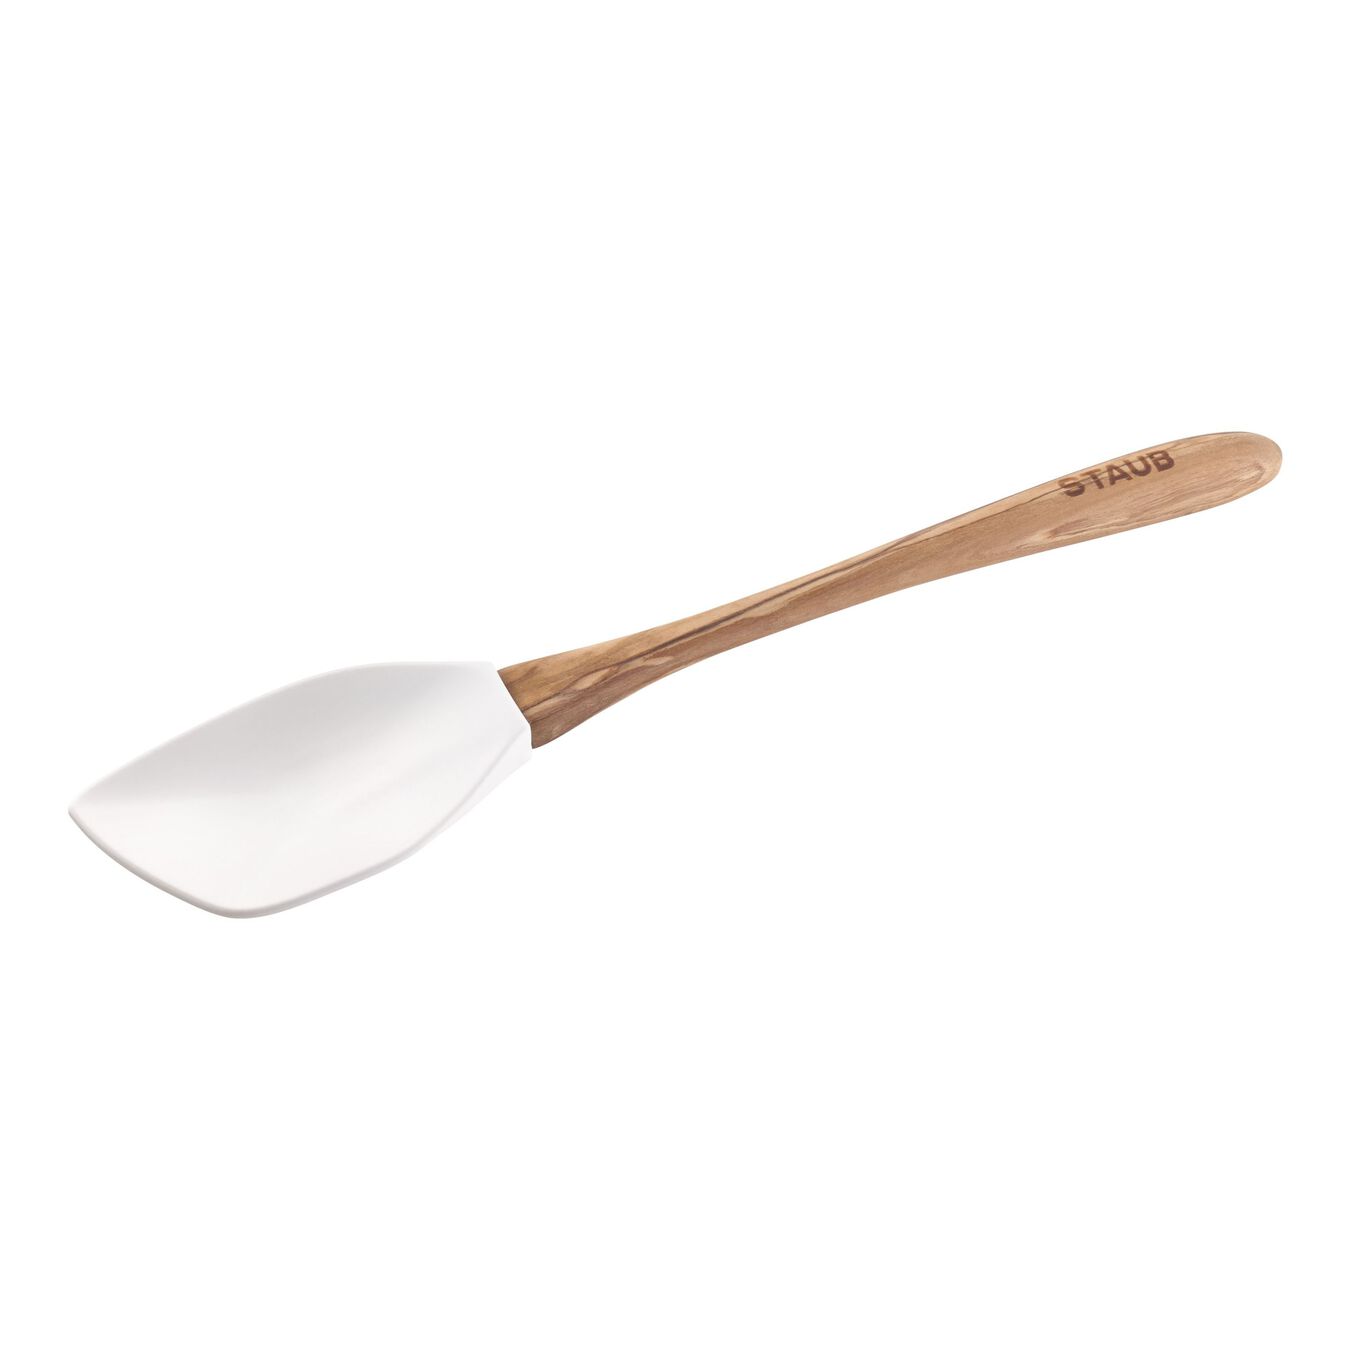 30 cm silicone Cooking spoon, white,,large 1